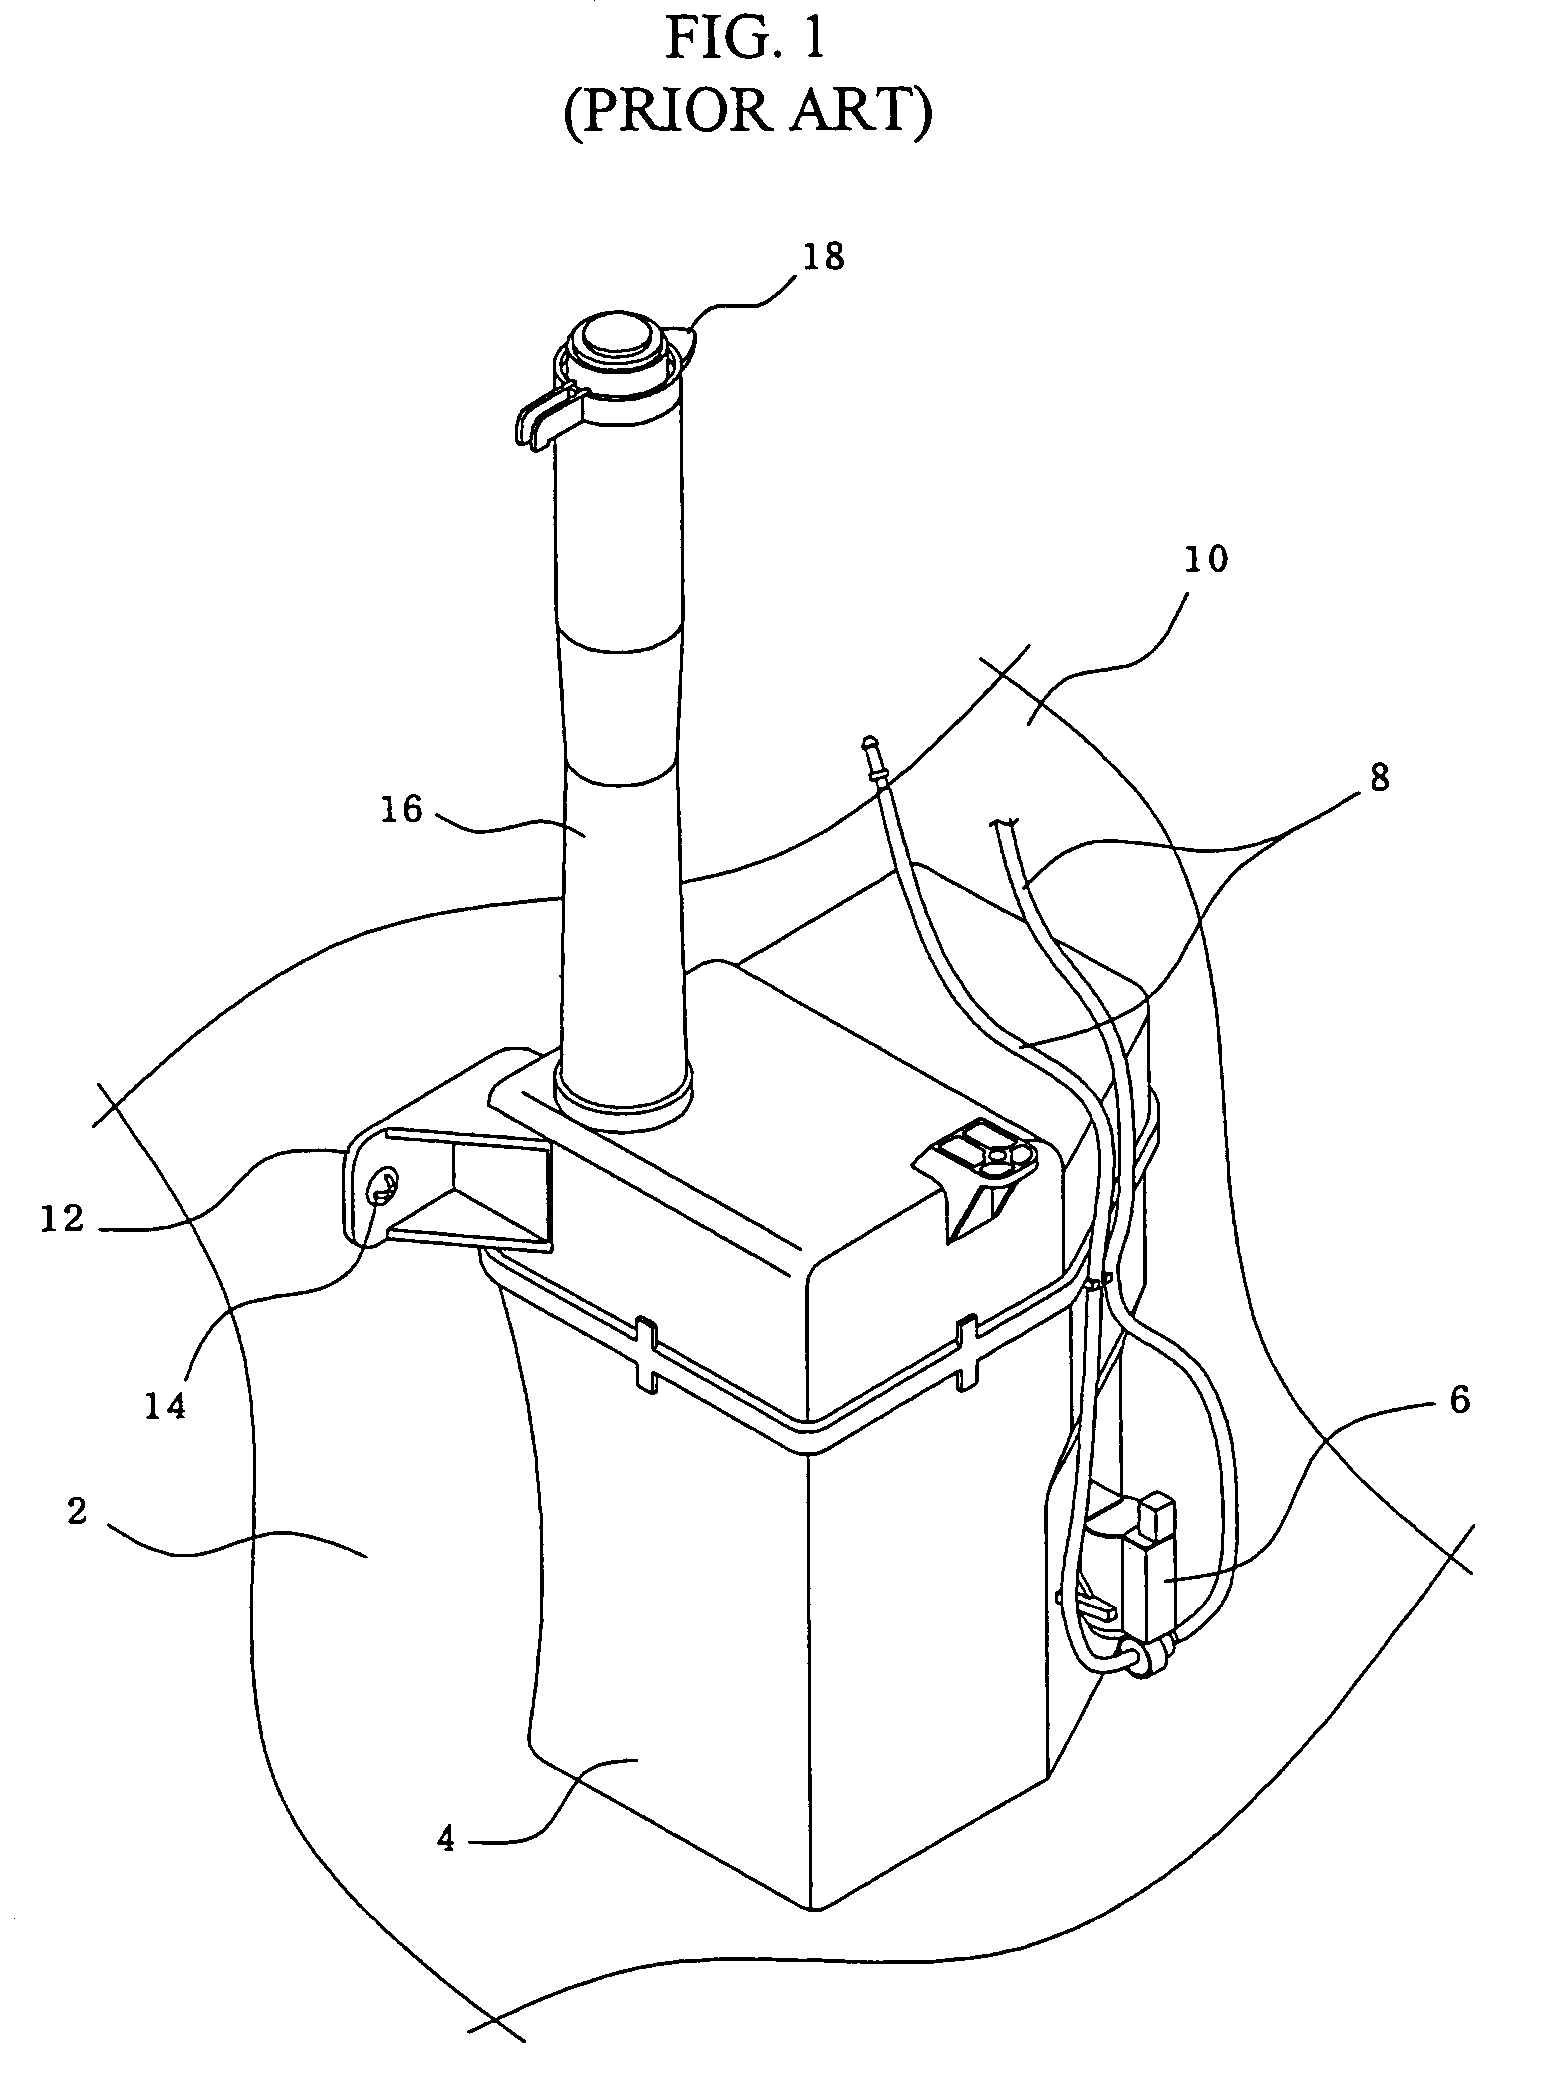 Windshield washer fluid reservoir tank device for vehicles